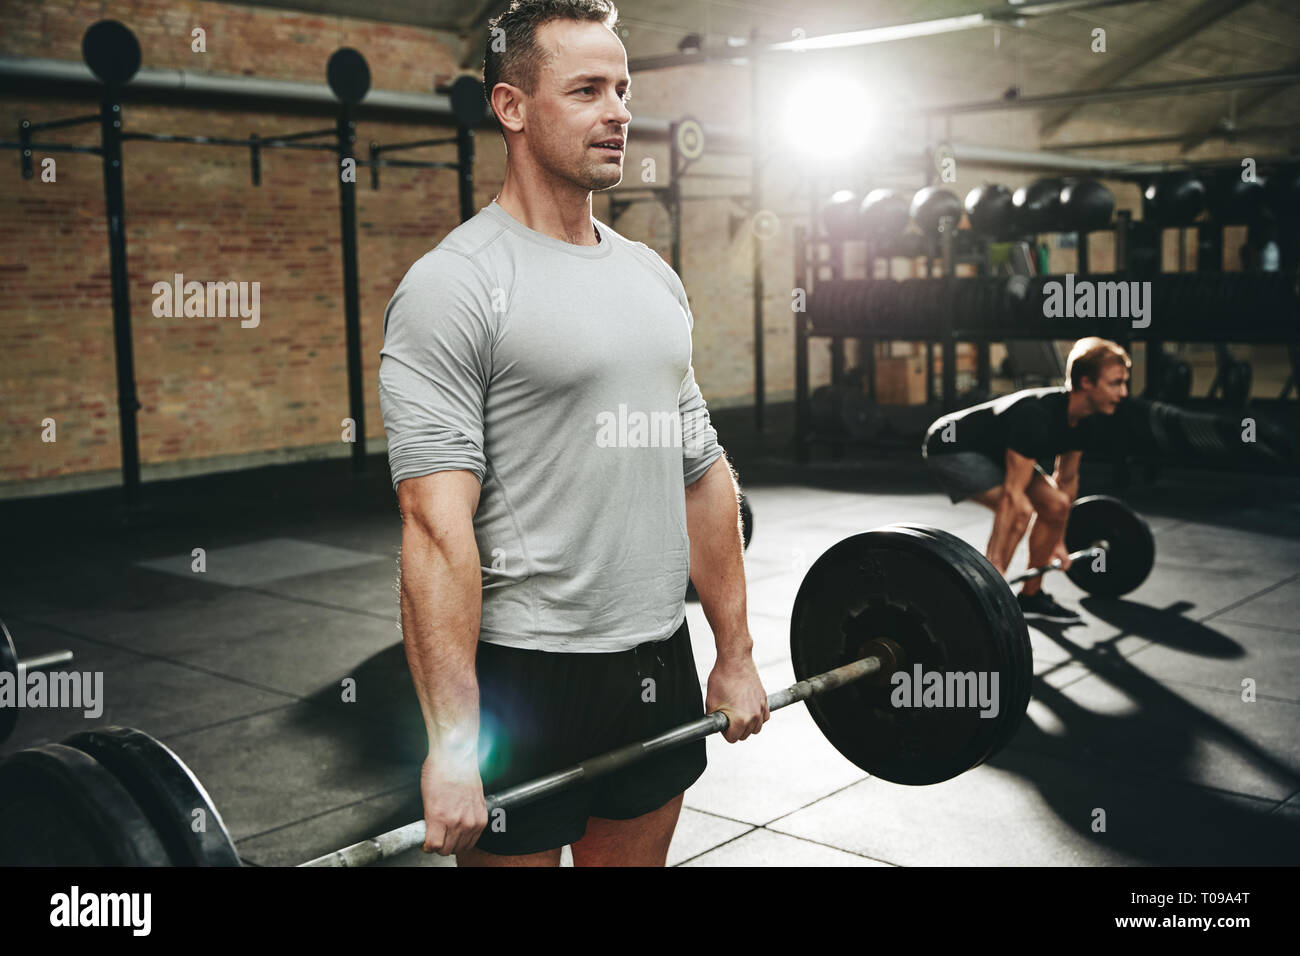 Fit man in sportswear preparing to lift a barbell with hearvy weights during a workout session at the gym Stock Photo